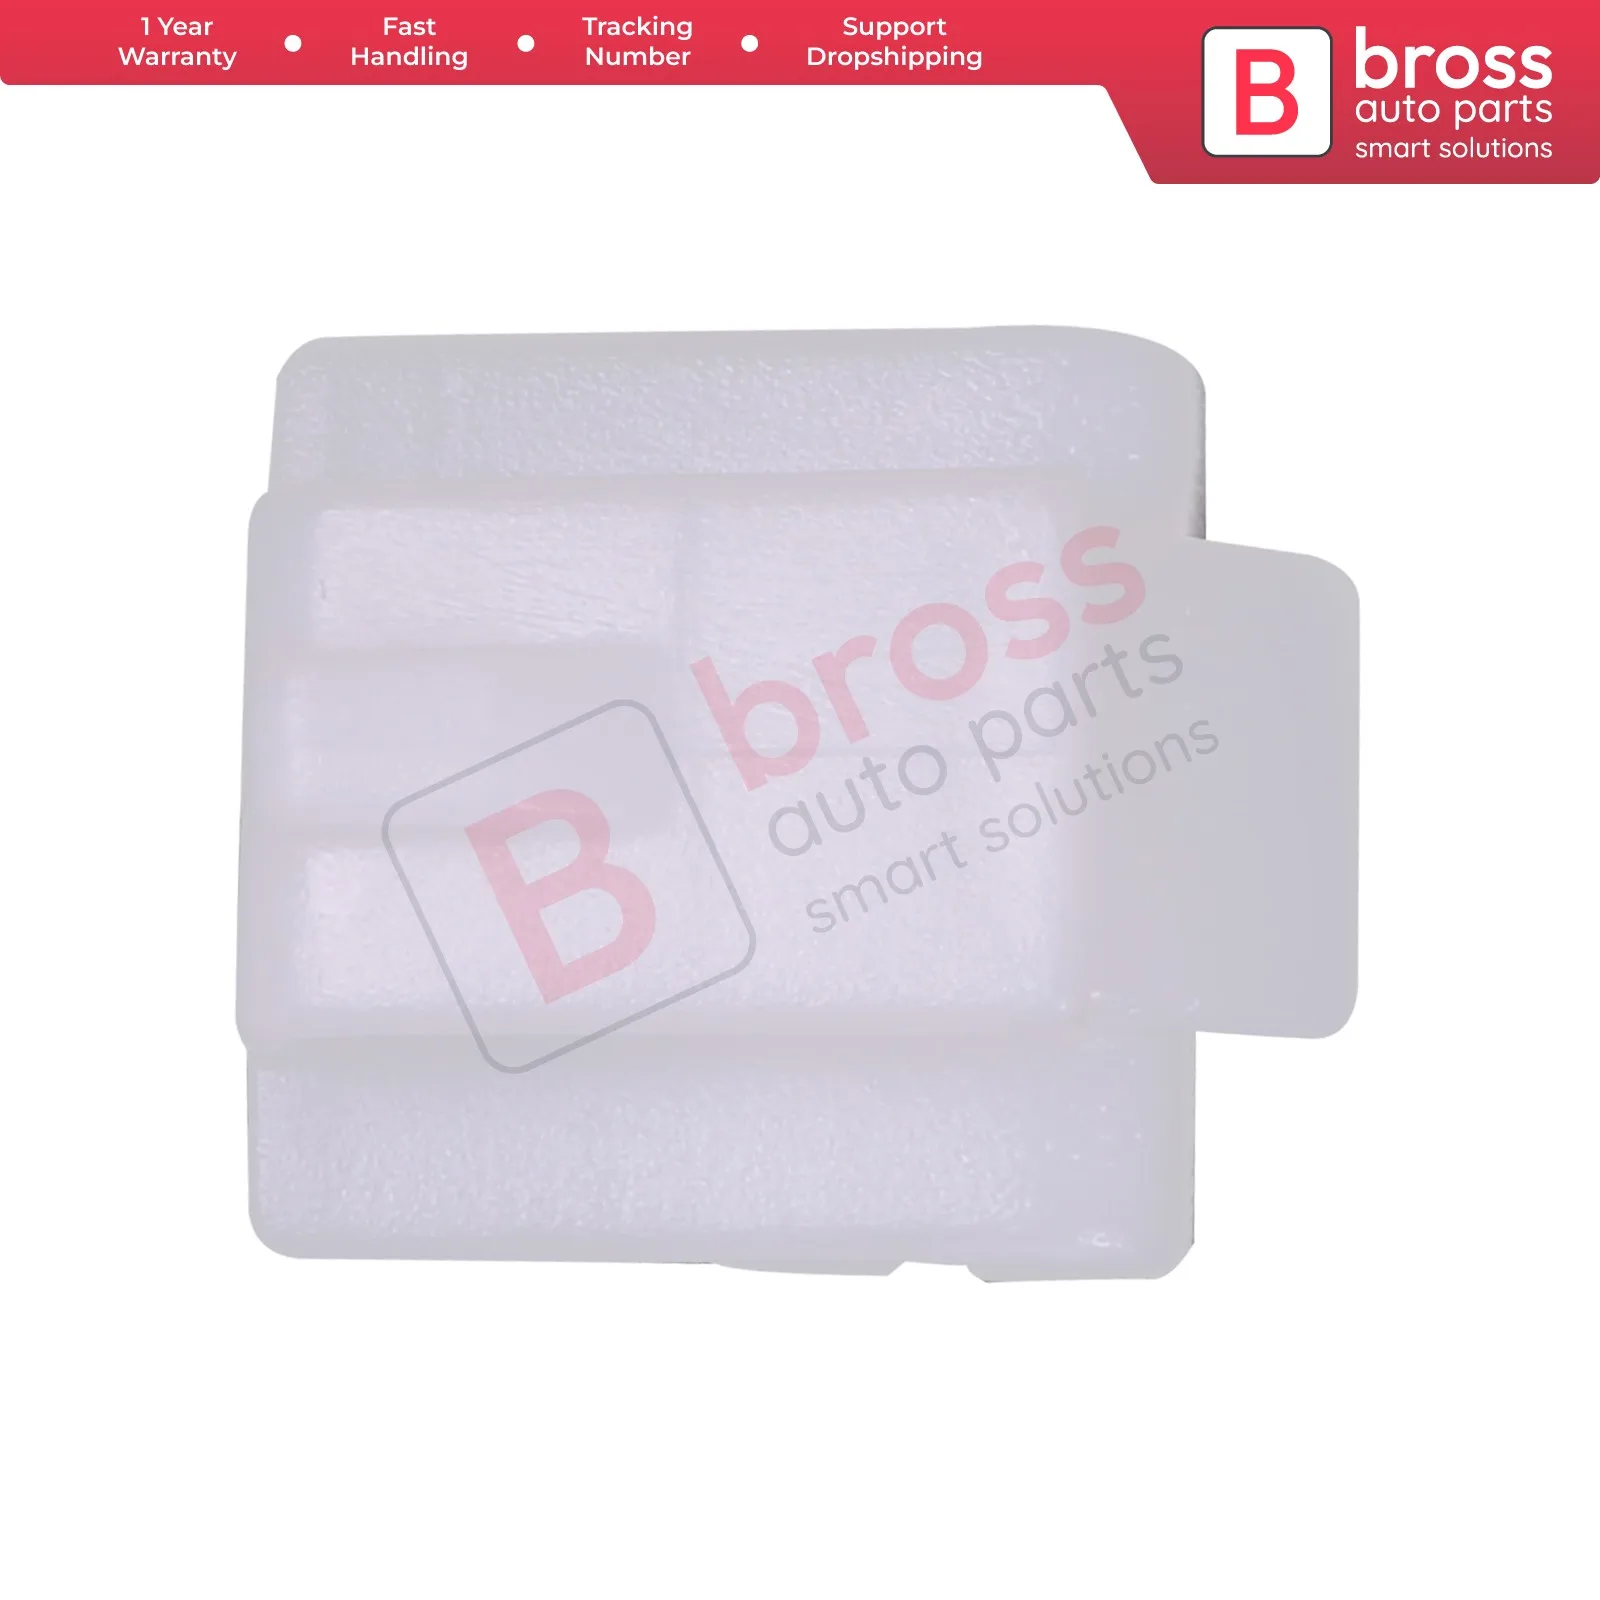 

Bross Auto Parts BCF43 10 Pieces Moulding Clip, White 82212-43000 for Hyundai H100 Fast Shipment Made in Turkey